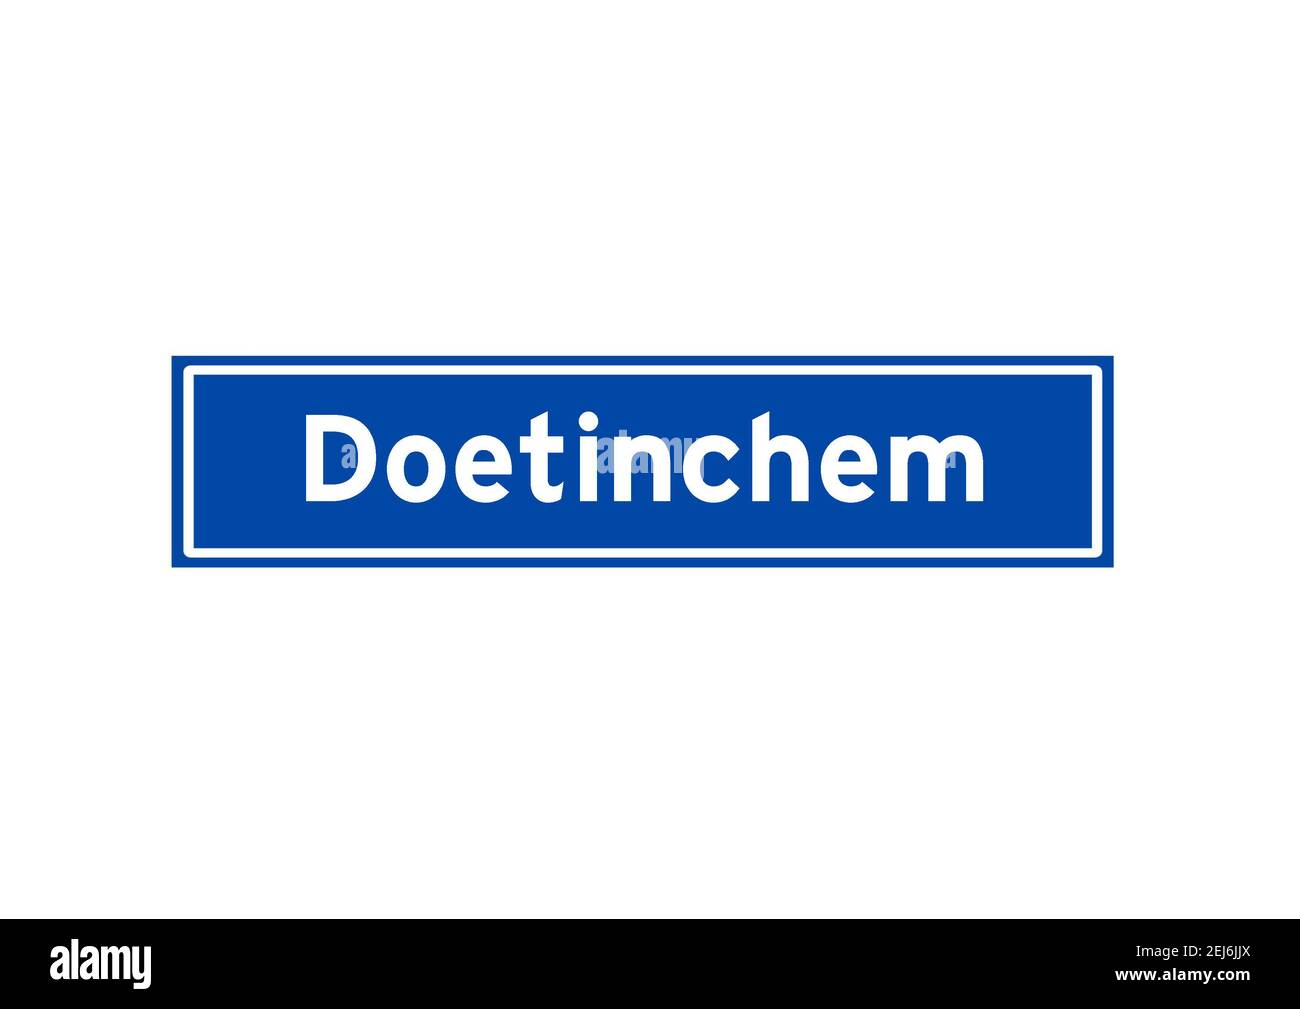 Doetinchem isolated Dutch place name sign. City sign from the Netherlands. Stock Photo